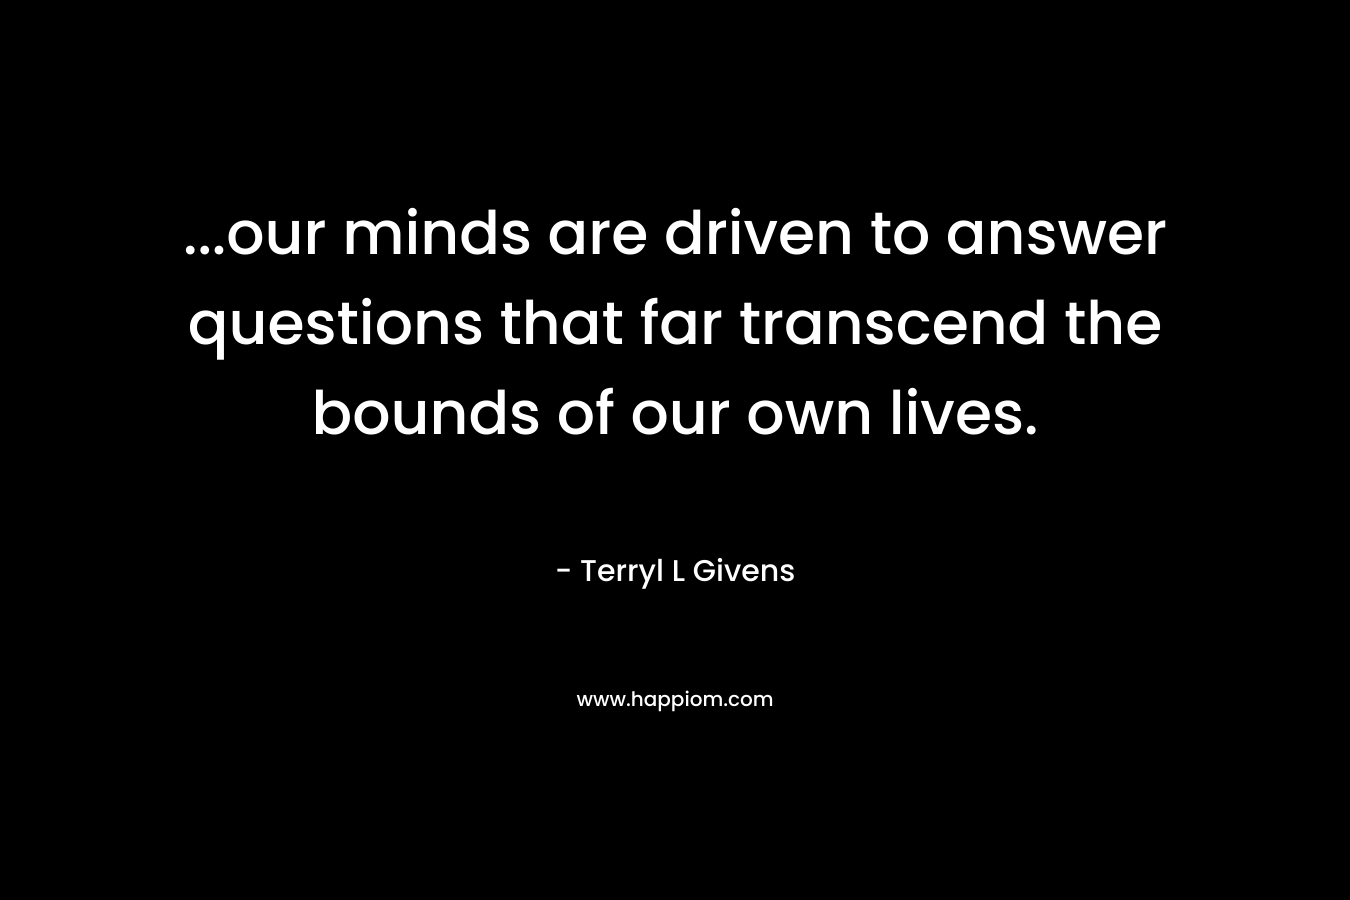 …our minds are driven to answer questions that far transcend the bounds of our own lives. – Terryl L Givens